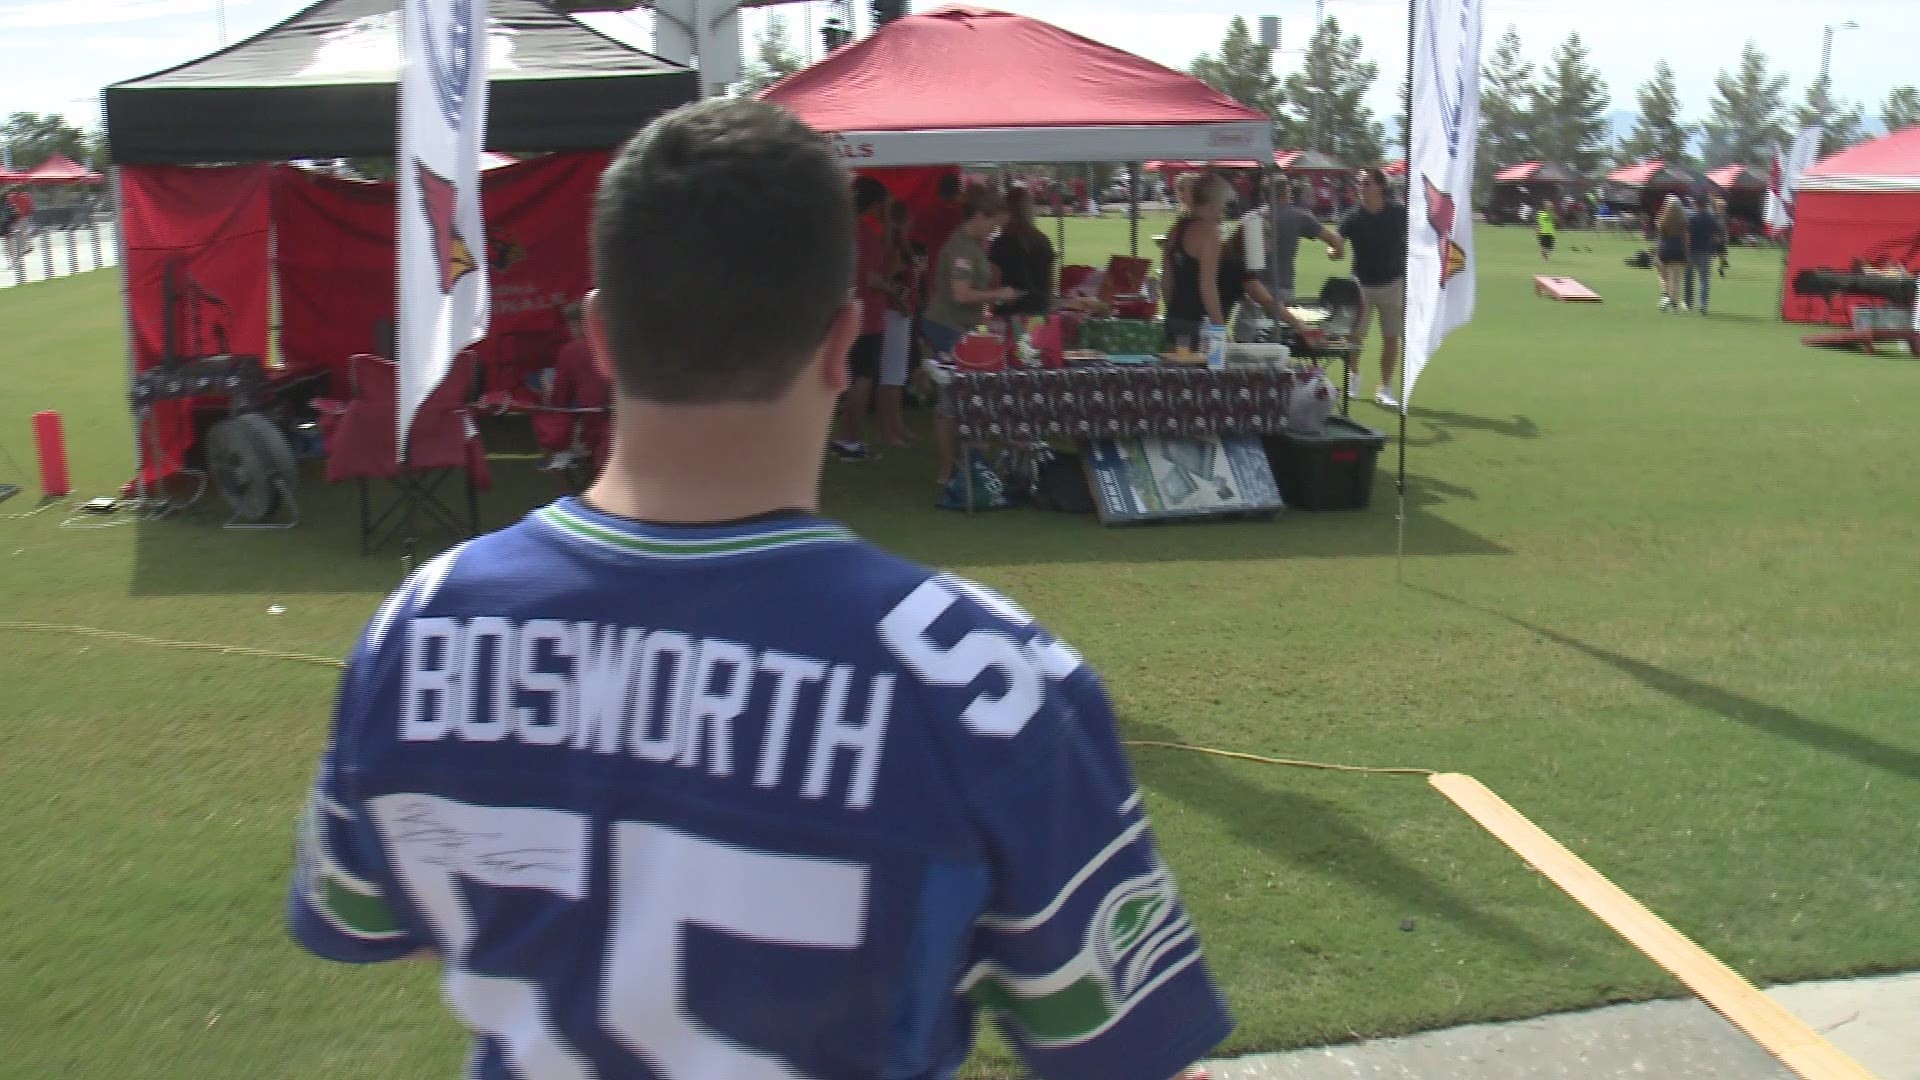 What happens when you get a local comedian (and Cardinals fan) Mike Turner to put on a Brian Bosworth jersey and take to the great lawn to troll Seahawk fan? Watch out Seattle Fan, Mike is ready to take you on.